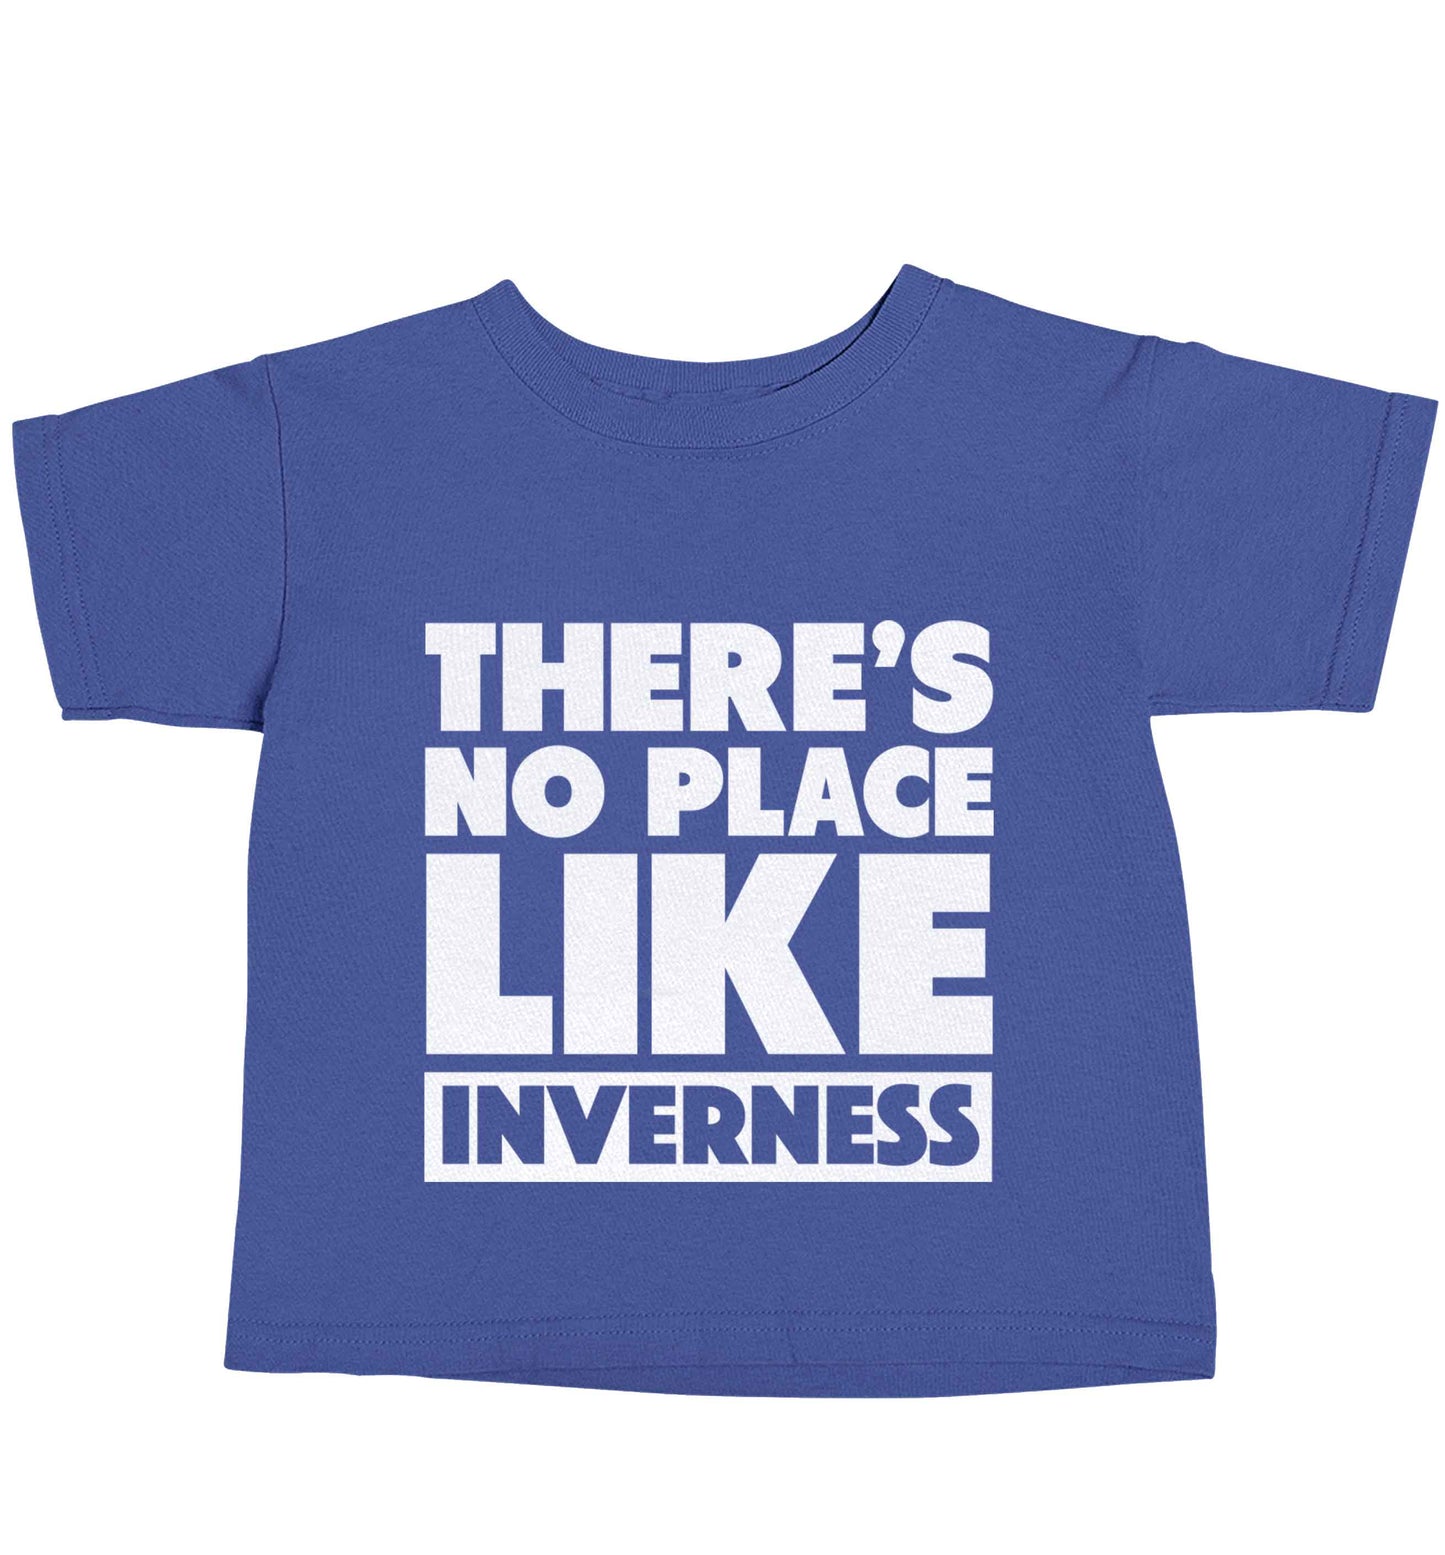 There's no place like Inverness blue baby toddler Tshirt 2 Years